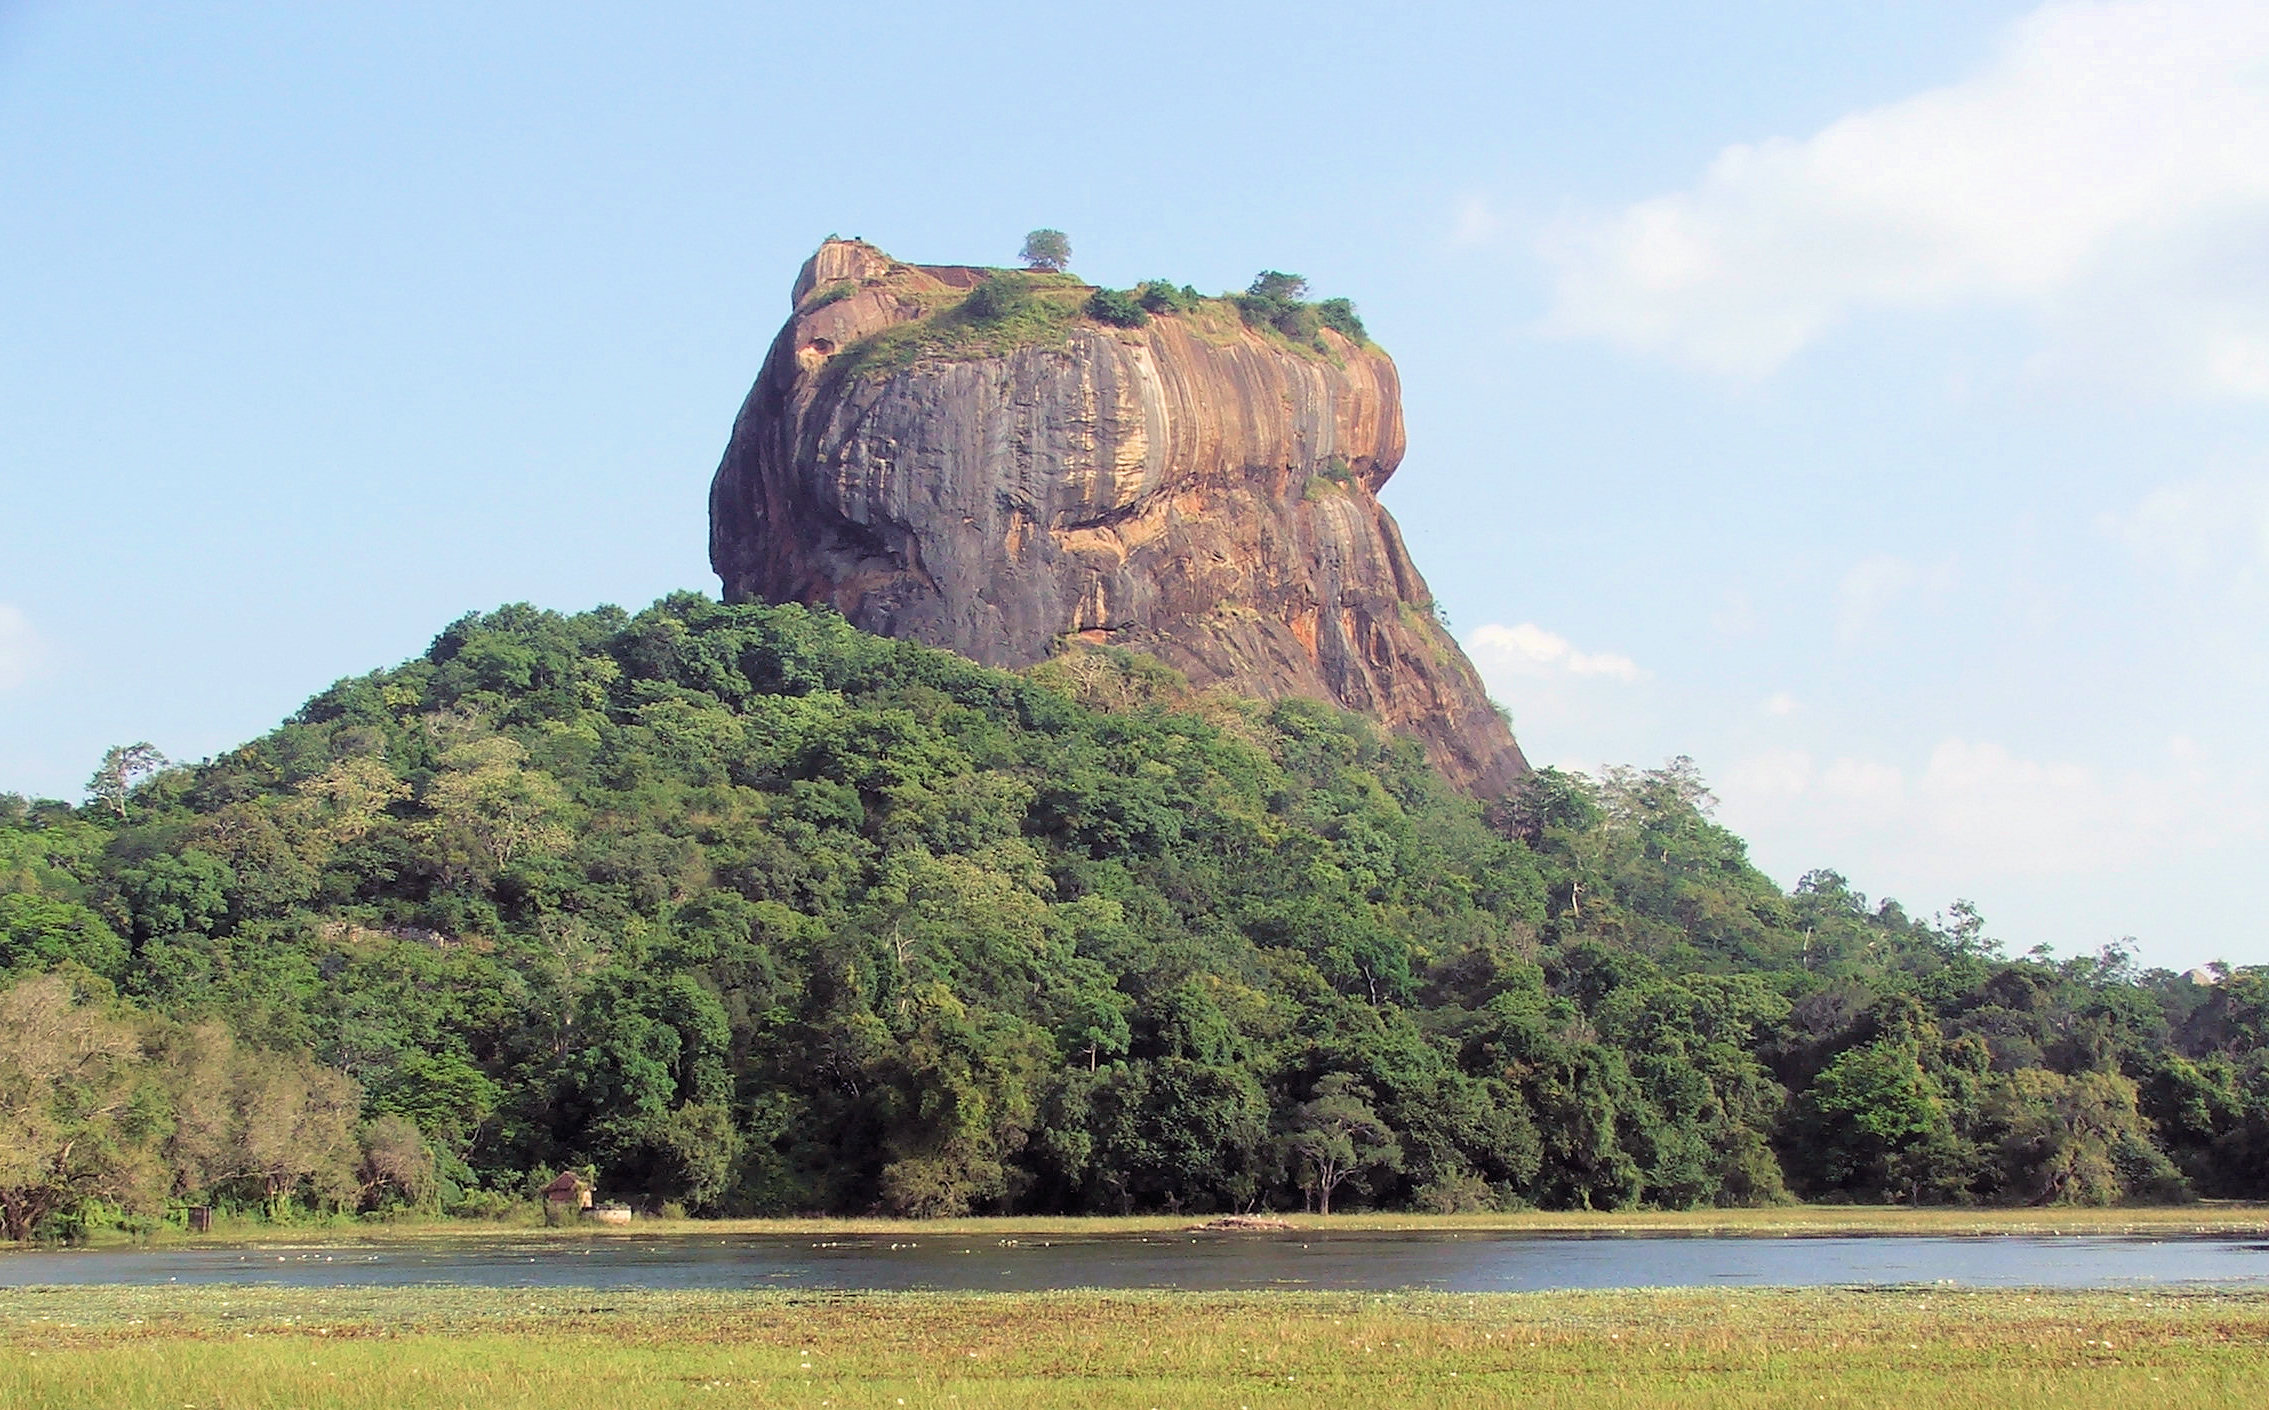 To describe the beauty of Sri Lanka, the Telegraph reports a phrase from a reader who voted the country as the most beautiful place in the world: “Everyone knows how beautiful Sri Lanka is, but few know how wonderful its inhabitants are”